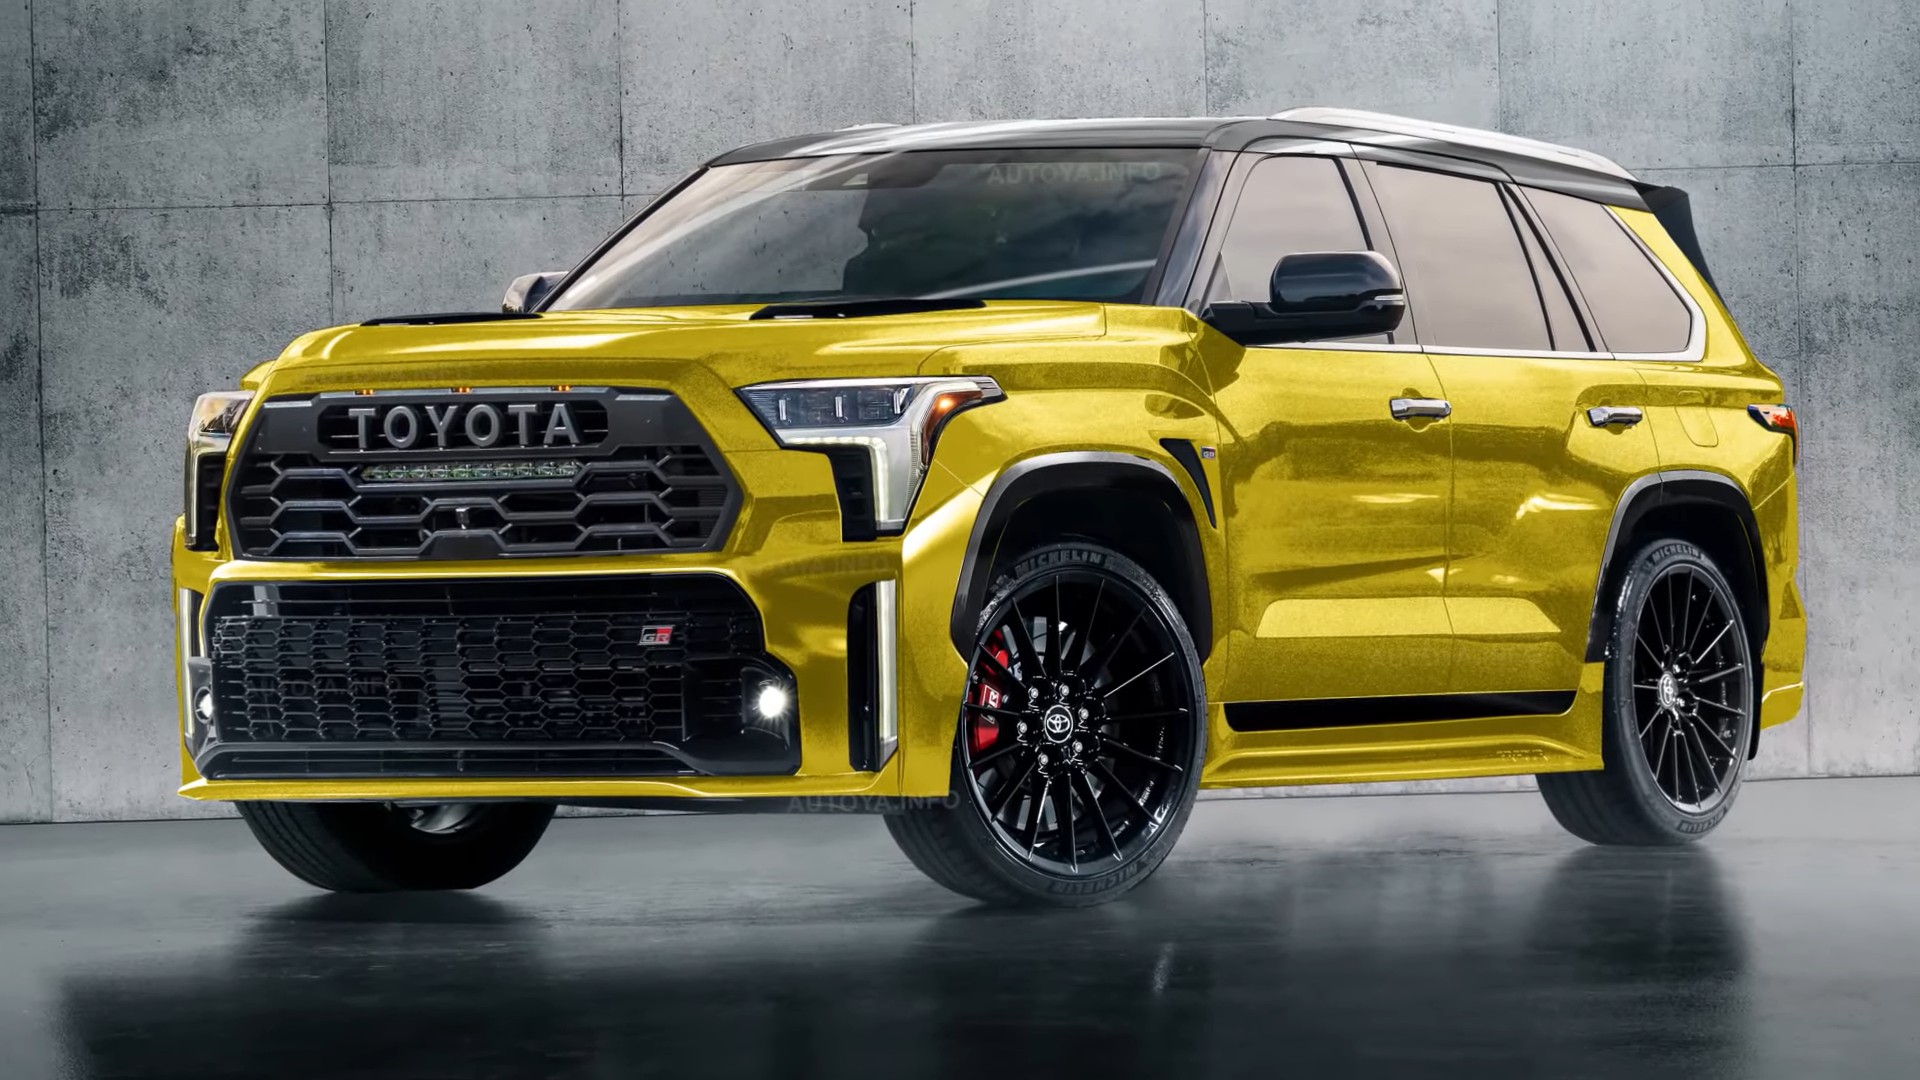 Virtual 600HP Toyota Sequoia GR Sport Presented as “Most Powerful” 3